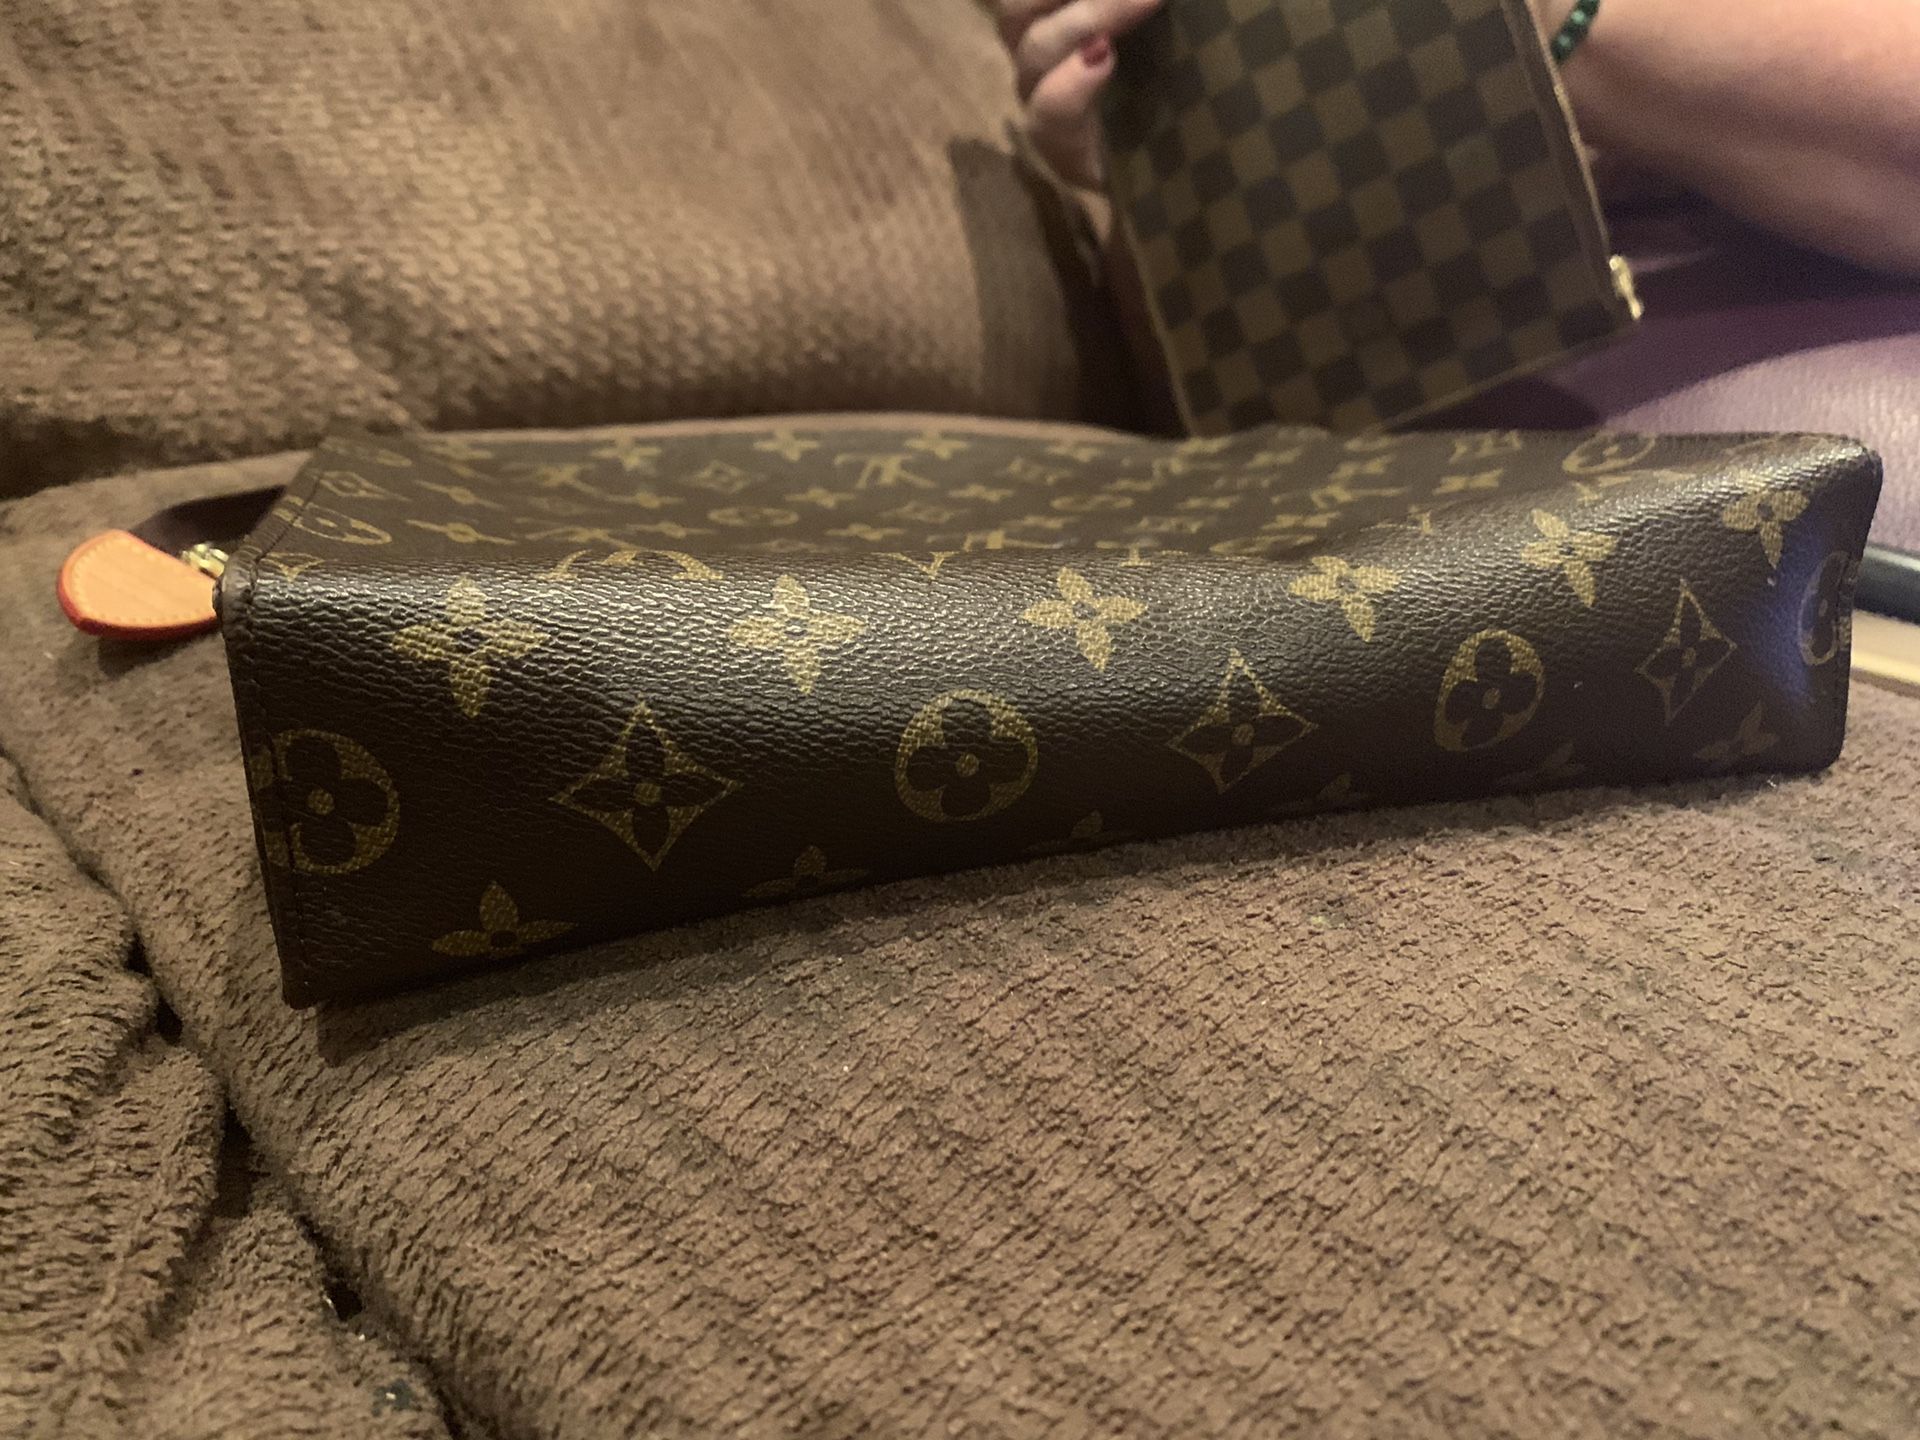 Lv key pouch Brand New date code CT5106 for Sale in Oakland, CA - OfferUp